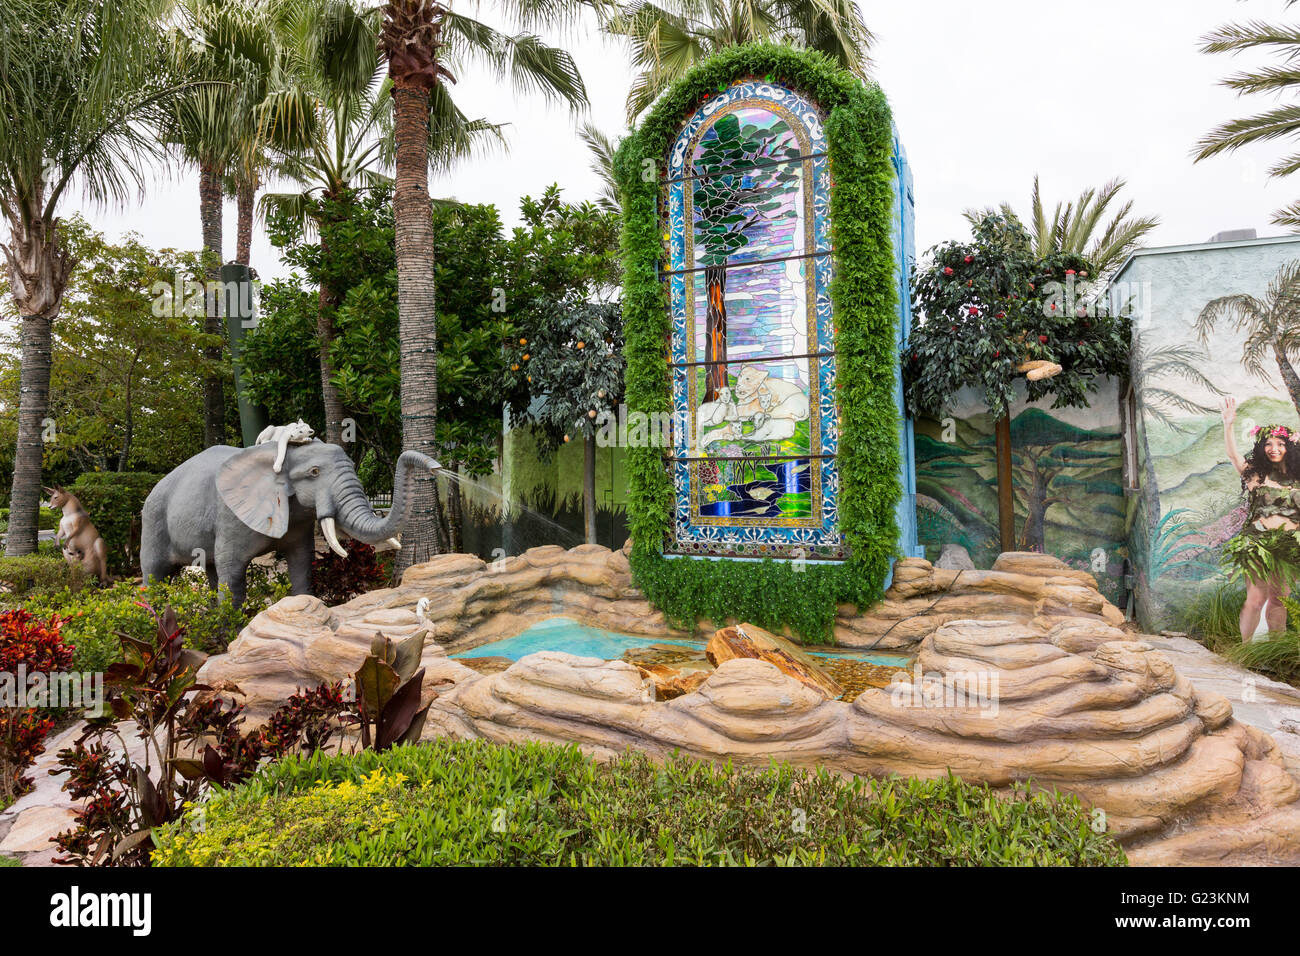 A menagerie of plastic animals in the Garden of Eden recreation at the Holy Land Experience Christian theme park in Orlando, Florida. Stock Photo